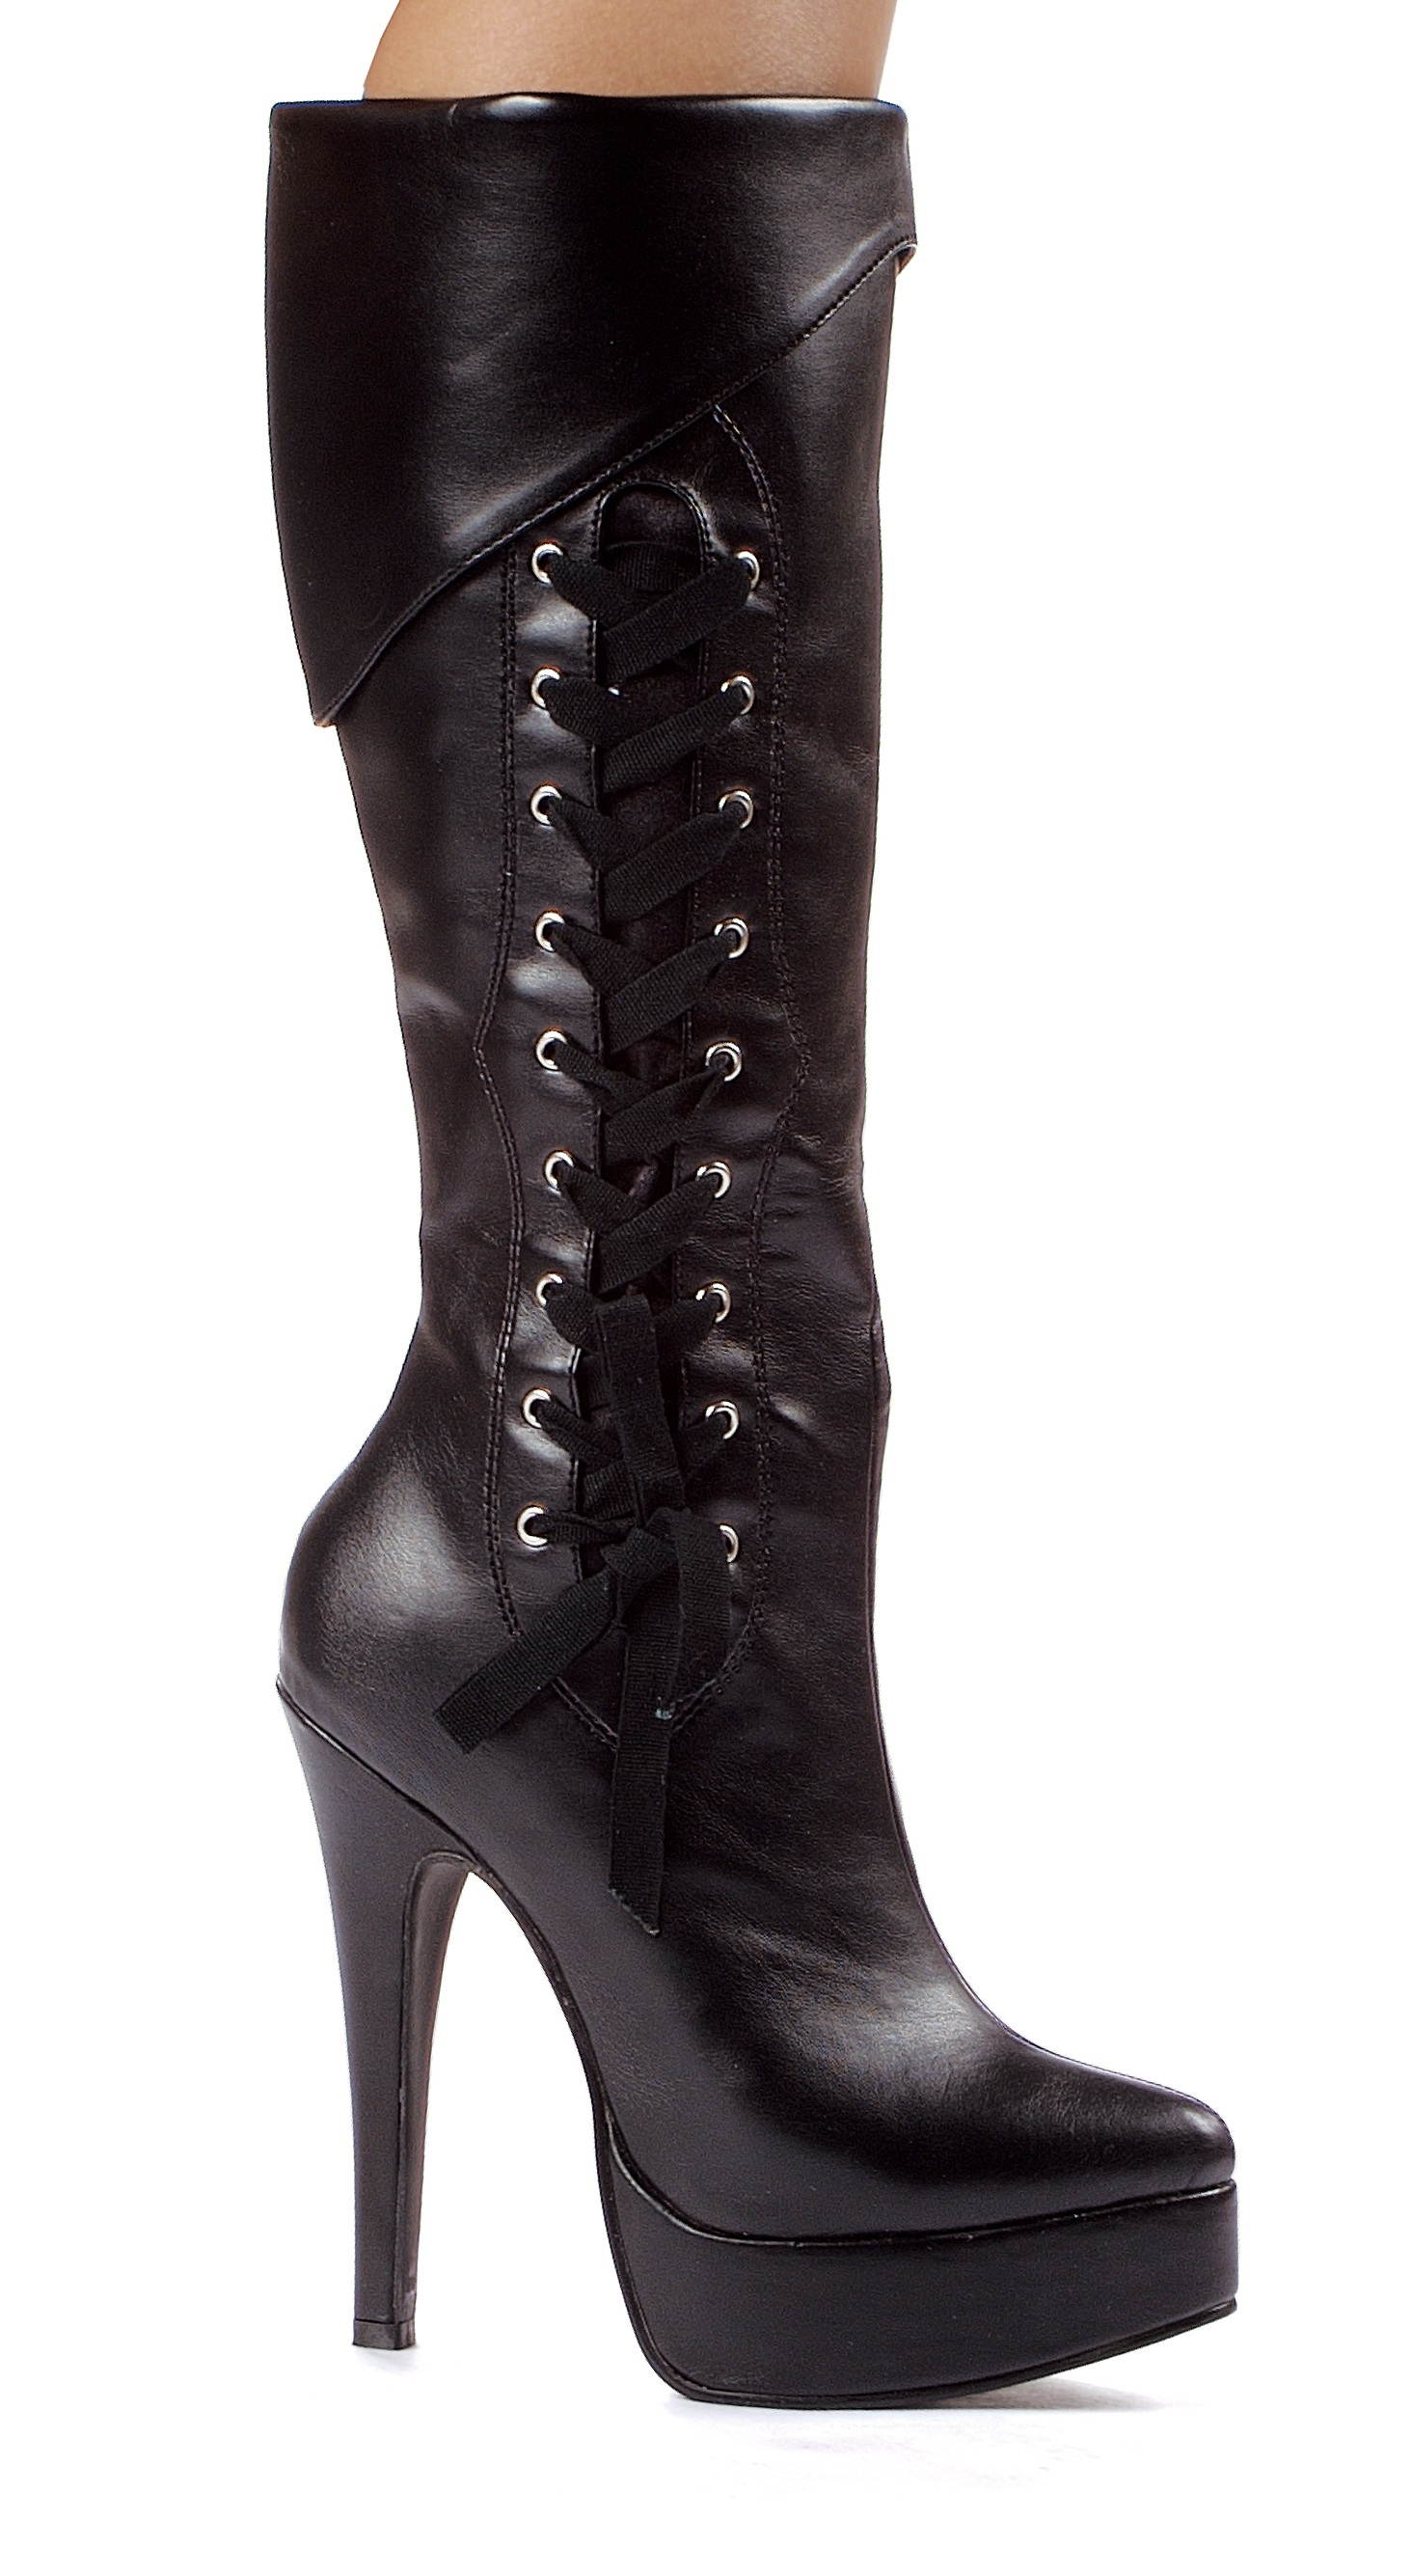 Scarlet - 5 Inch Cuffed Boots with Lace-Up Side